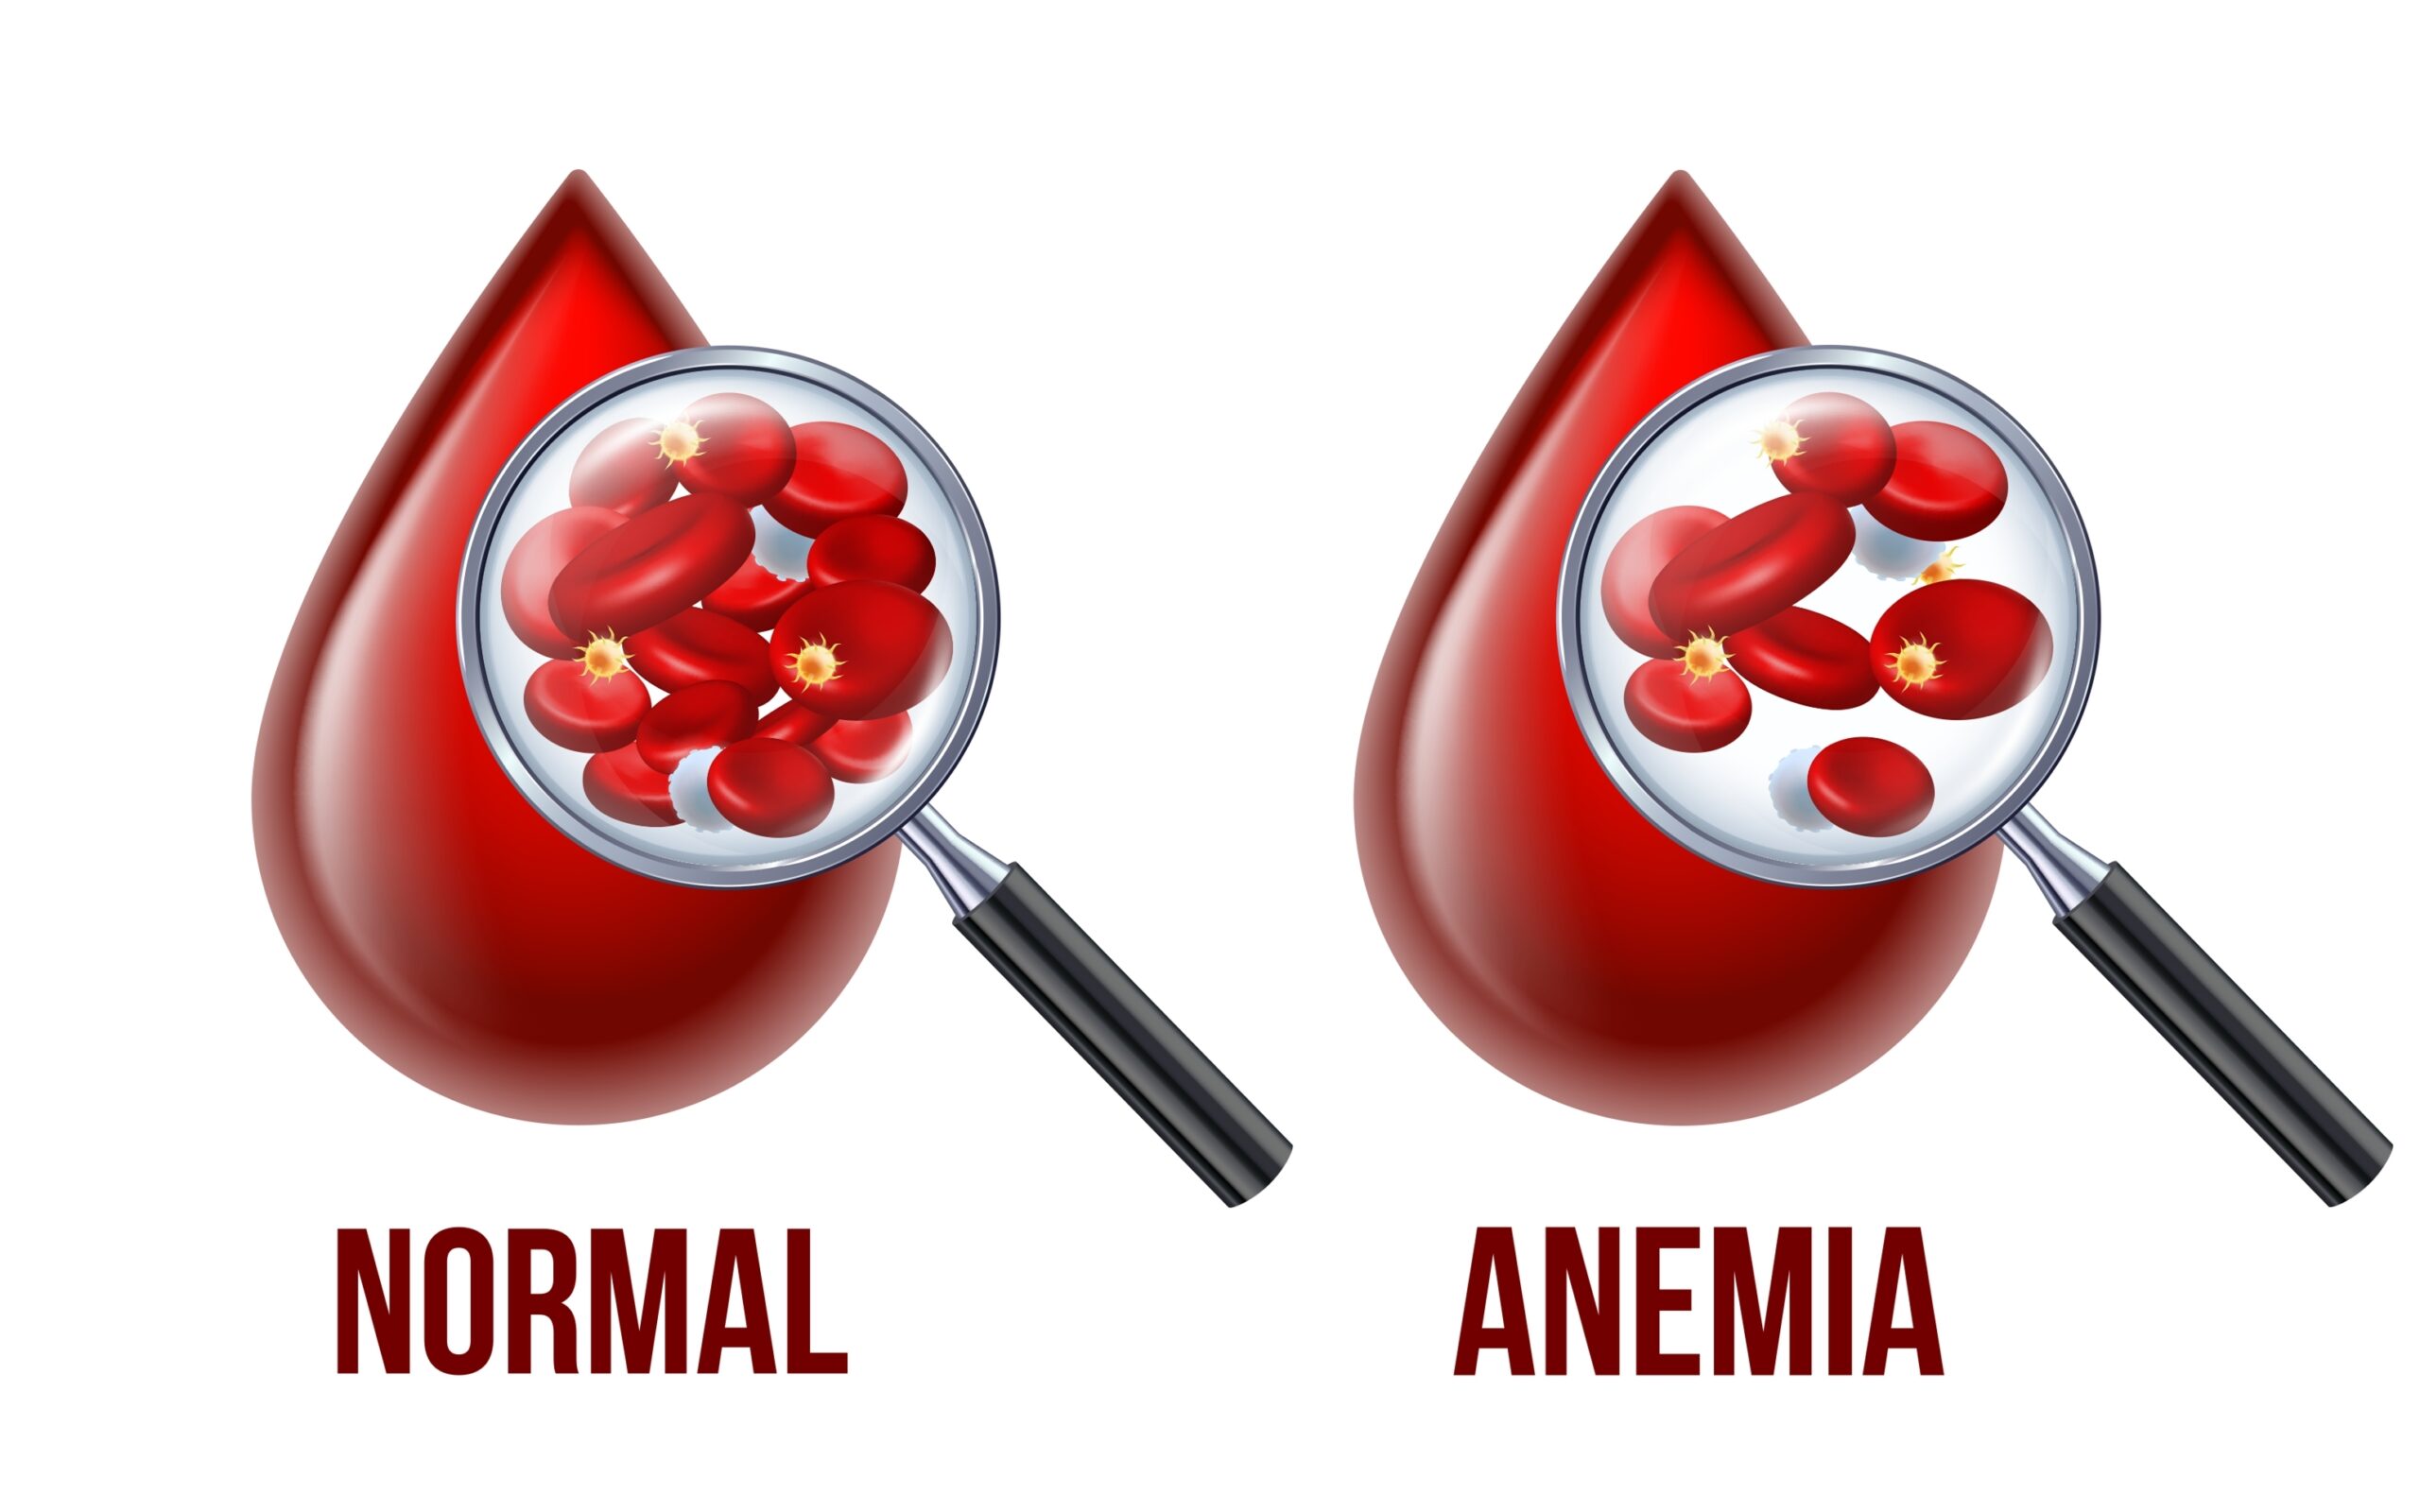 Anemia: Causes, Symptoms, Types, Diagnosis and Treatment